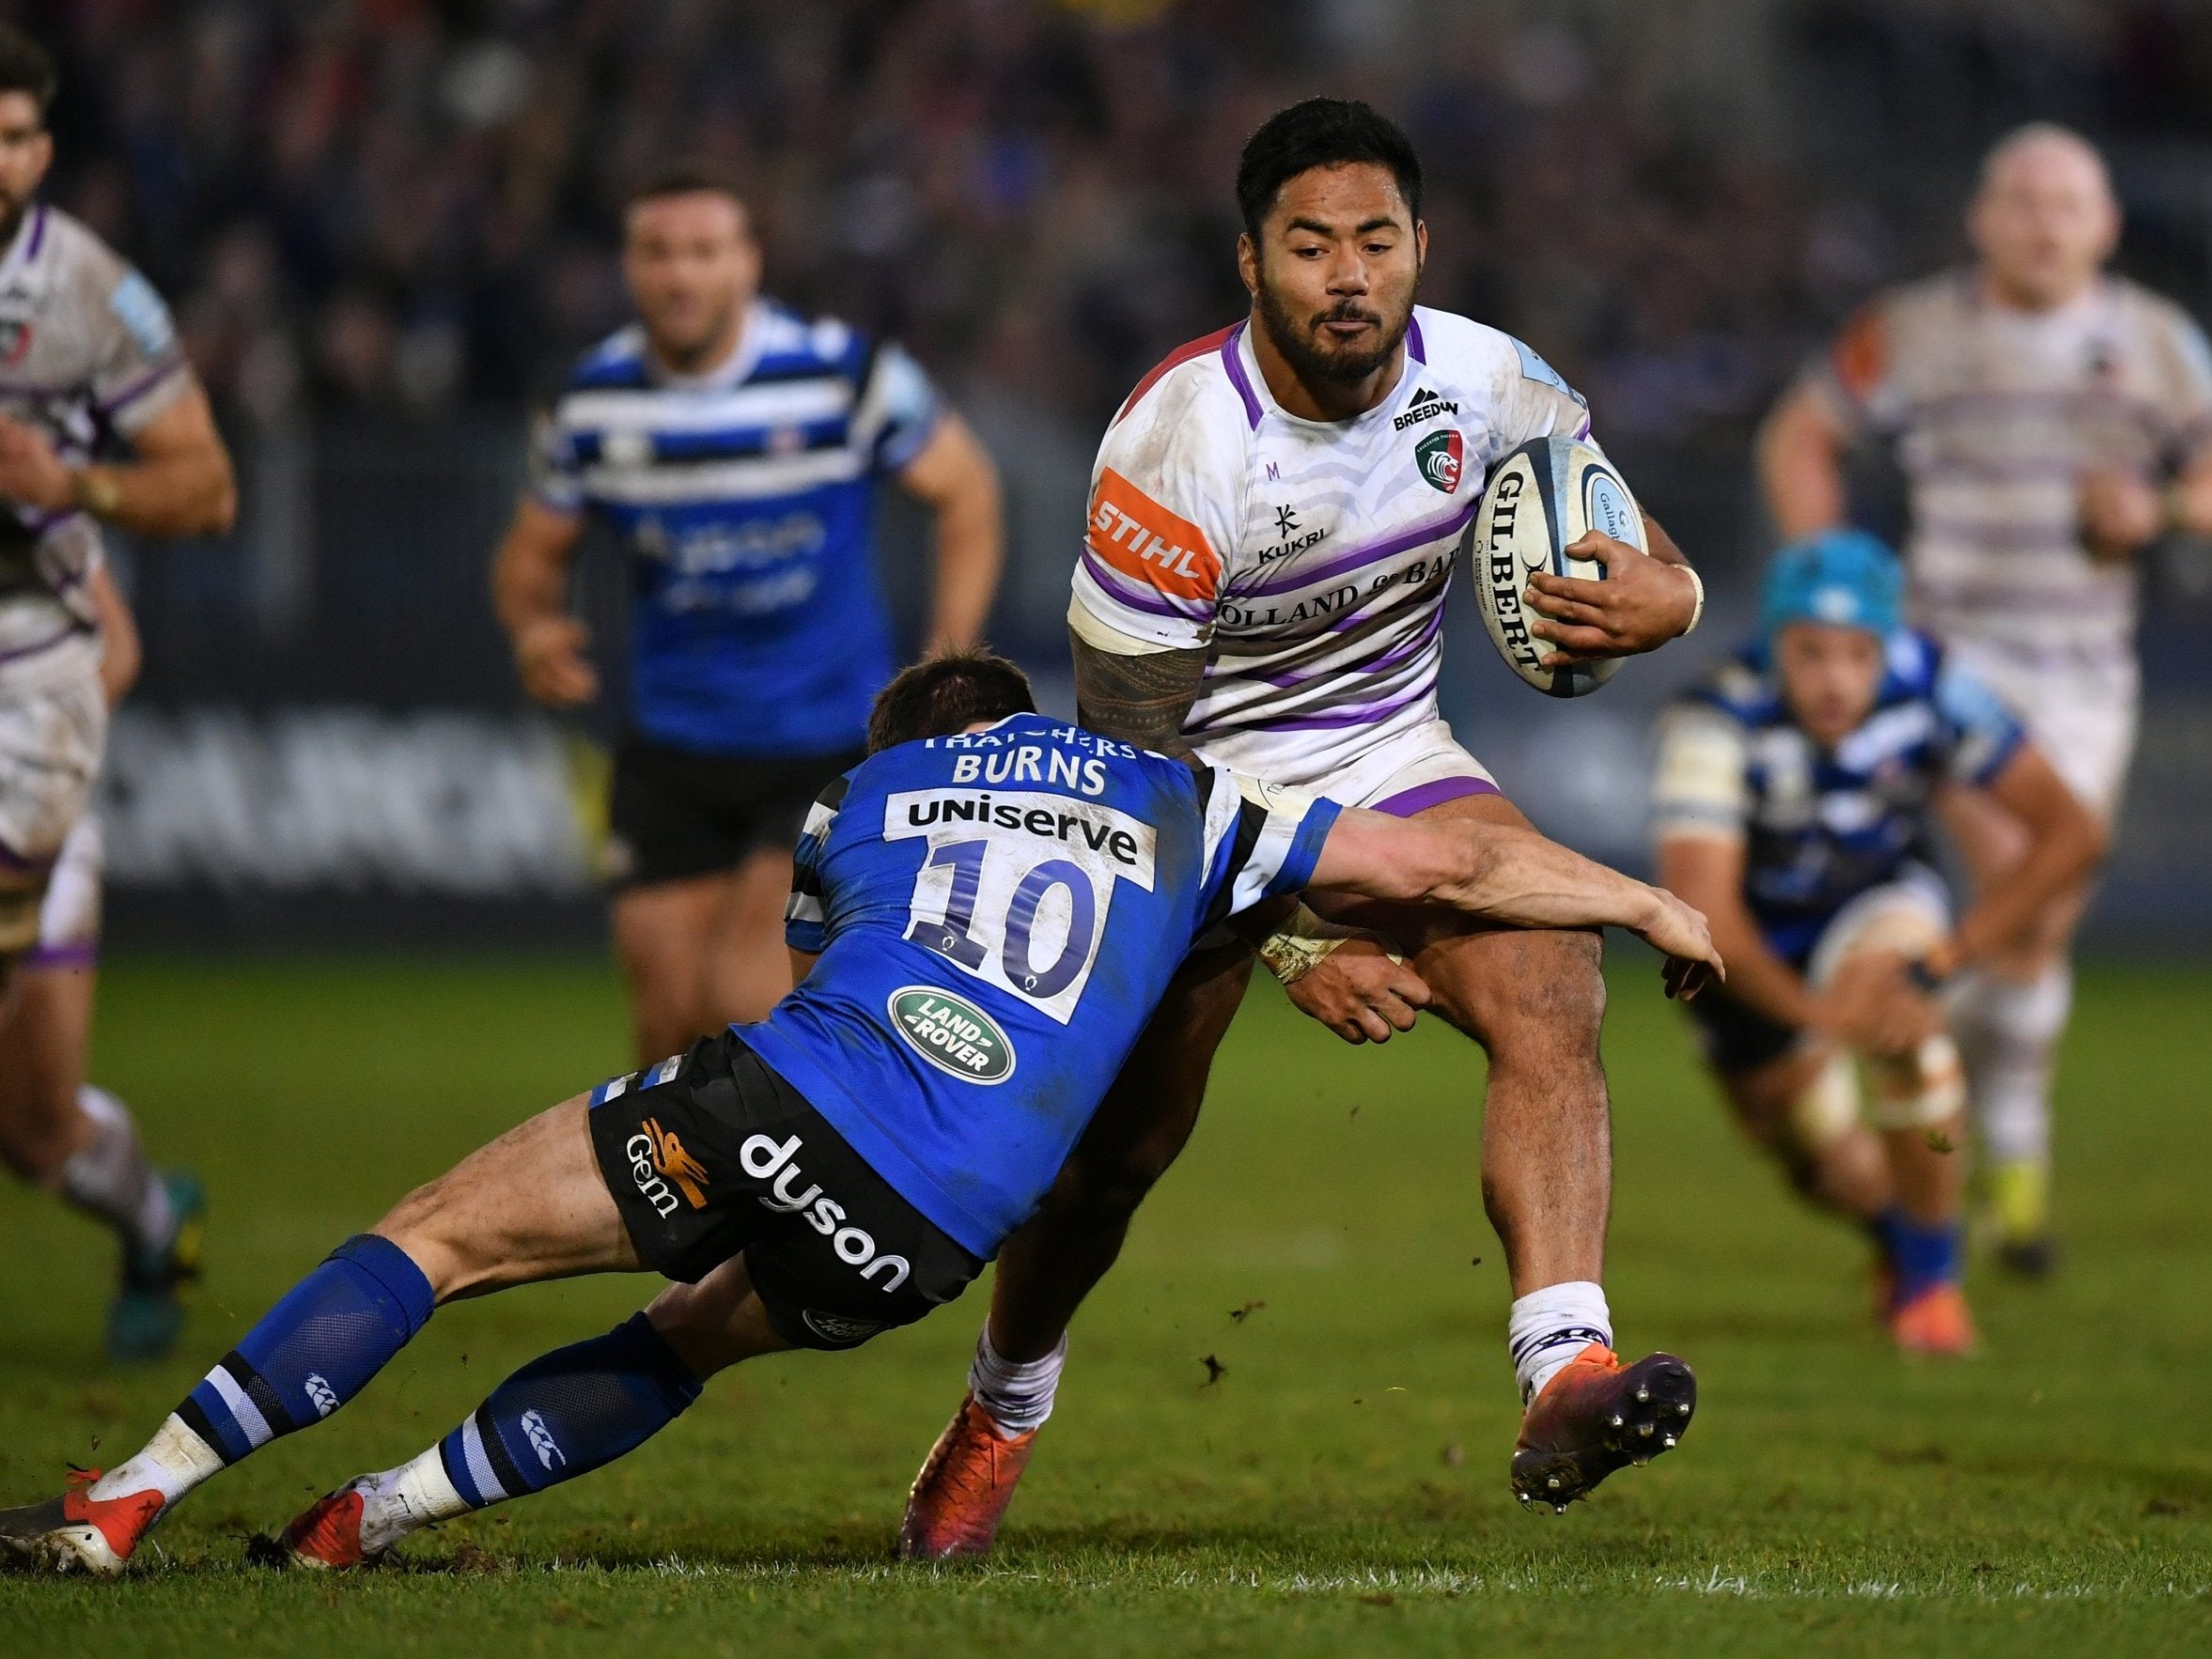 Leicester's resurgence against Harlequins was undone in defeat against Bath last week